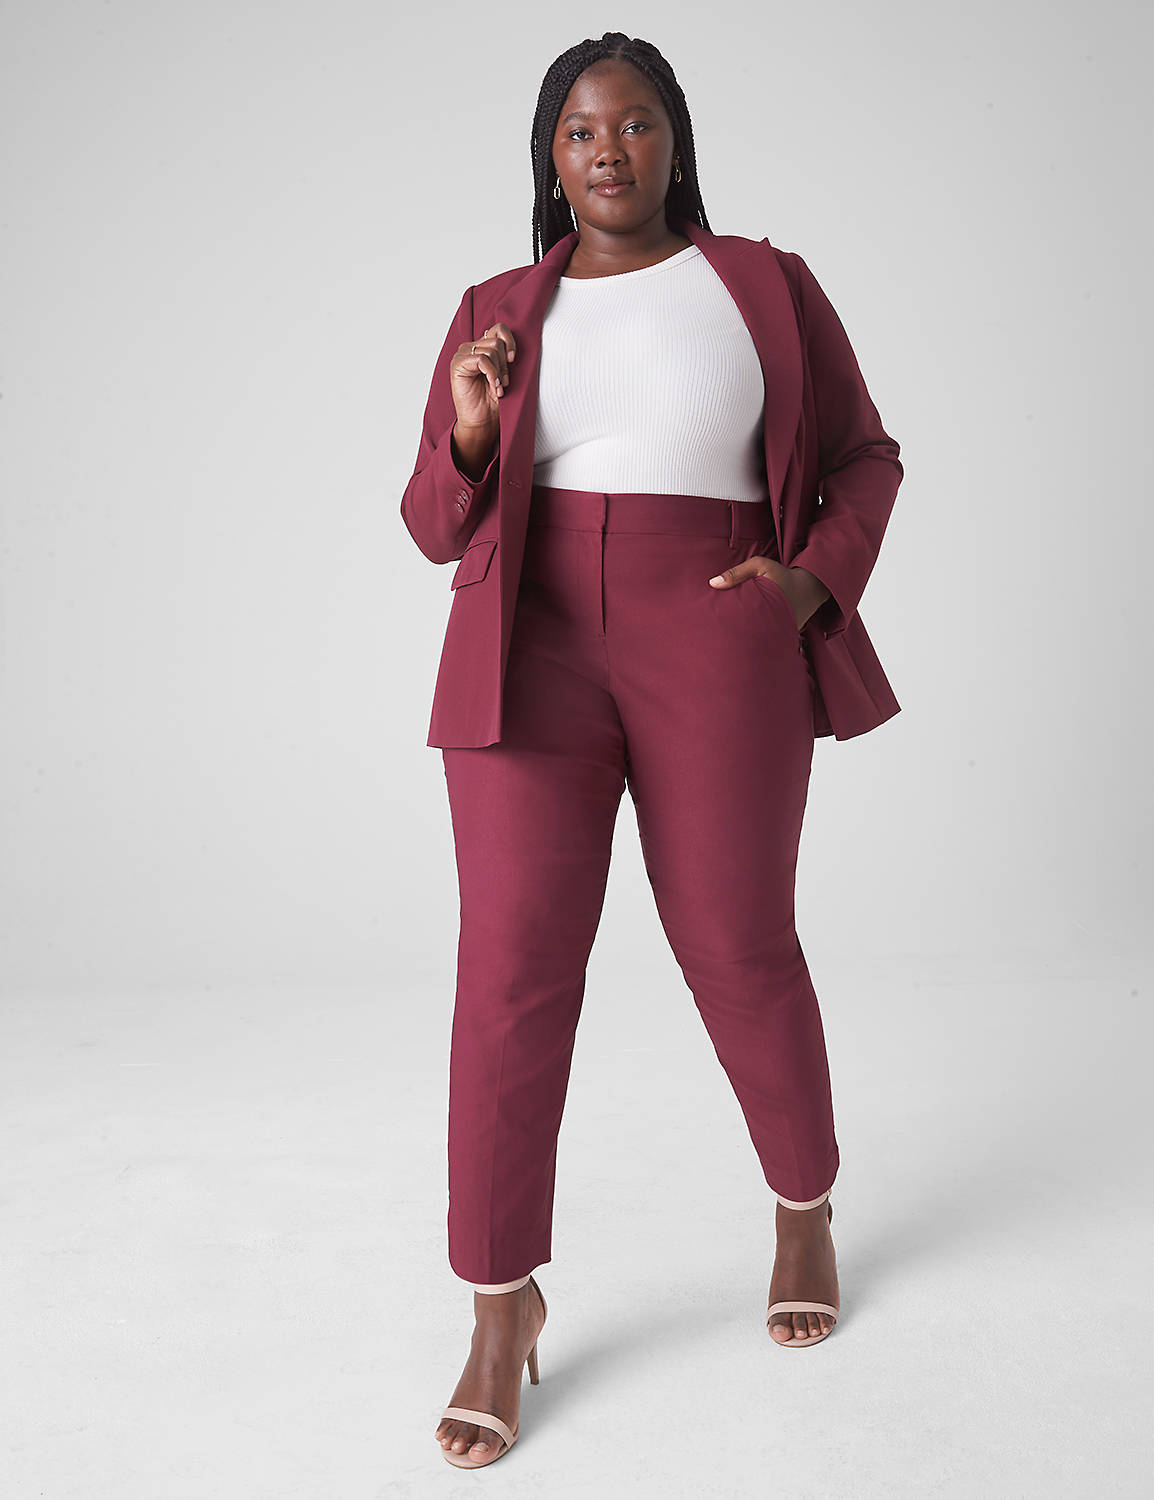 Oxide Semblance To adapt Plus Size Clothing for Women | Lane Bryant